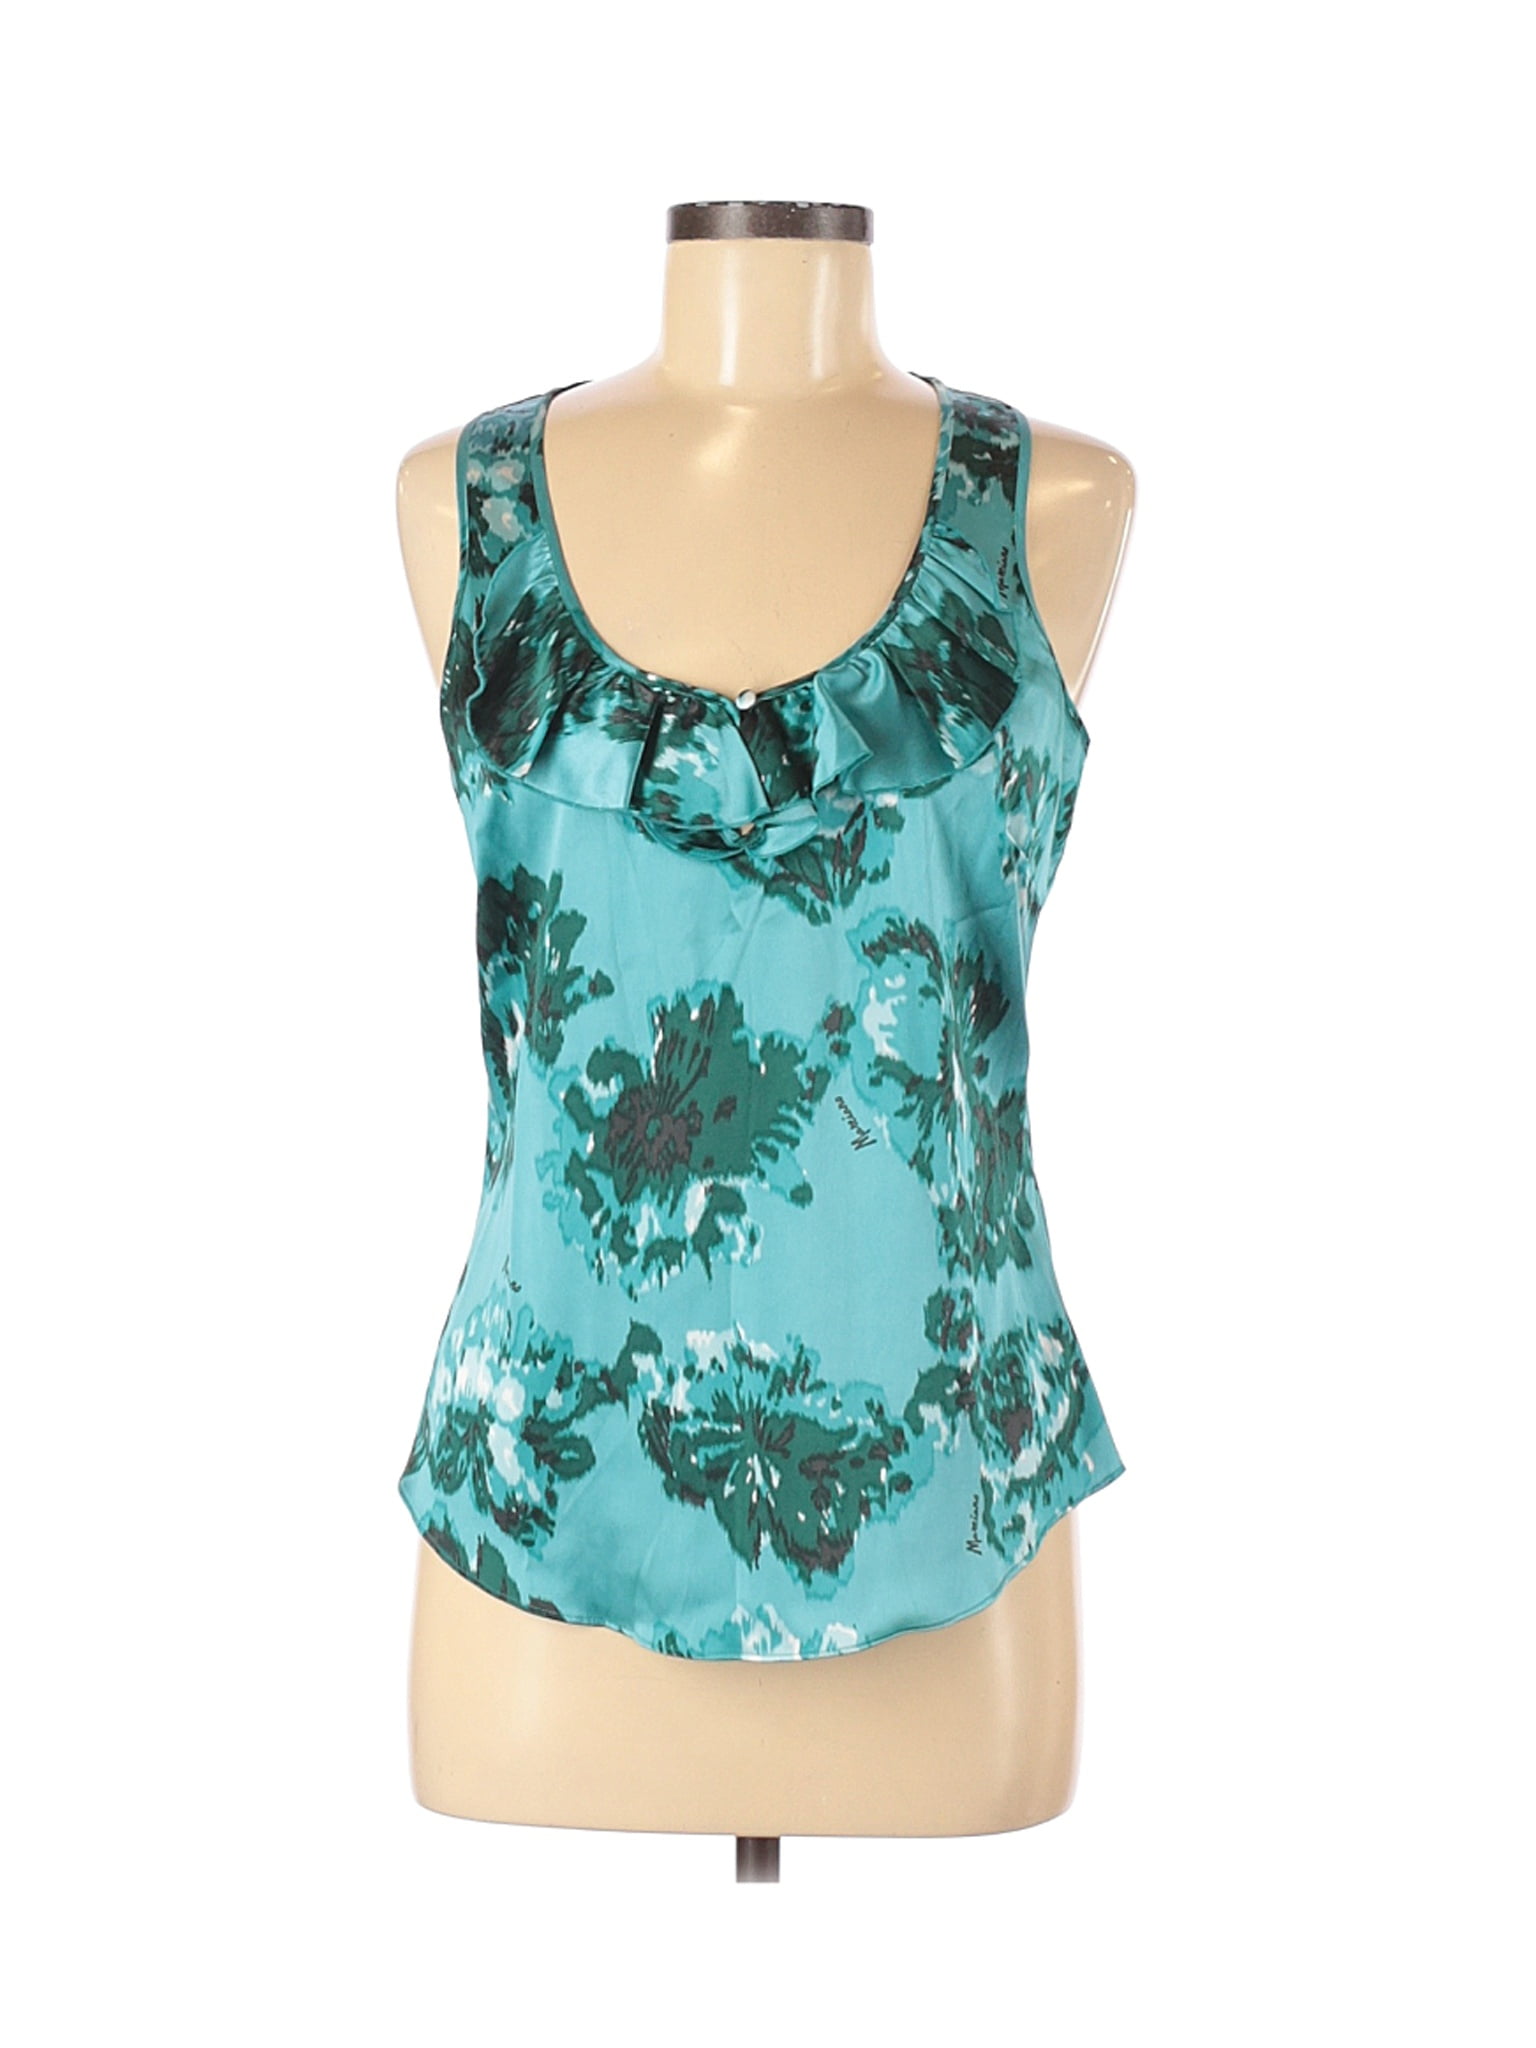 Marciano - Pre-Owned Marciano Women's Size M Sleeveless Silk Top ...